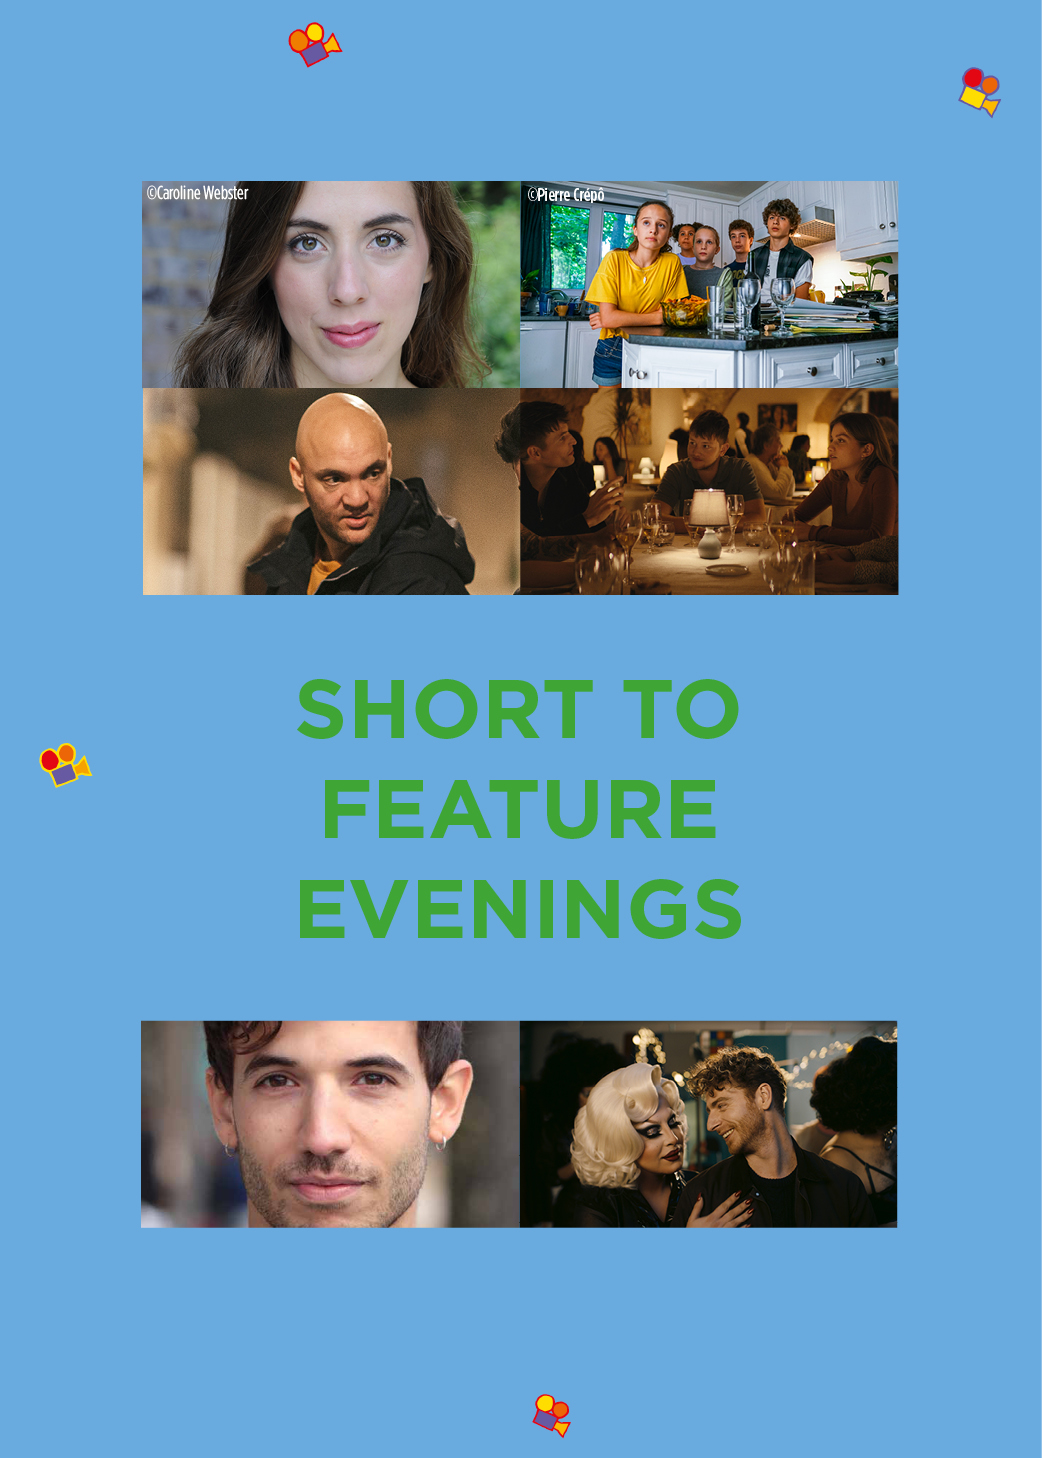 Short to feature evenings